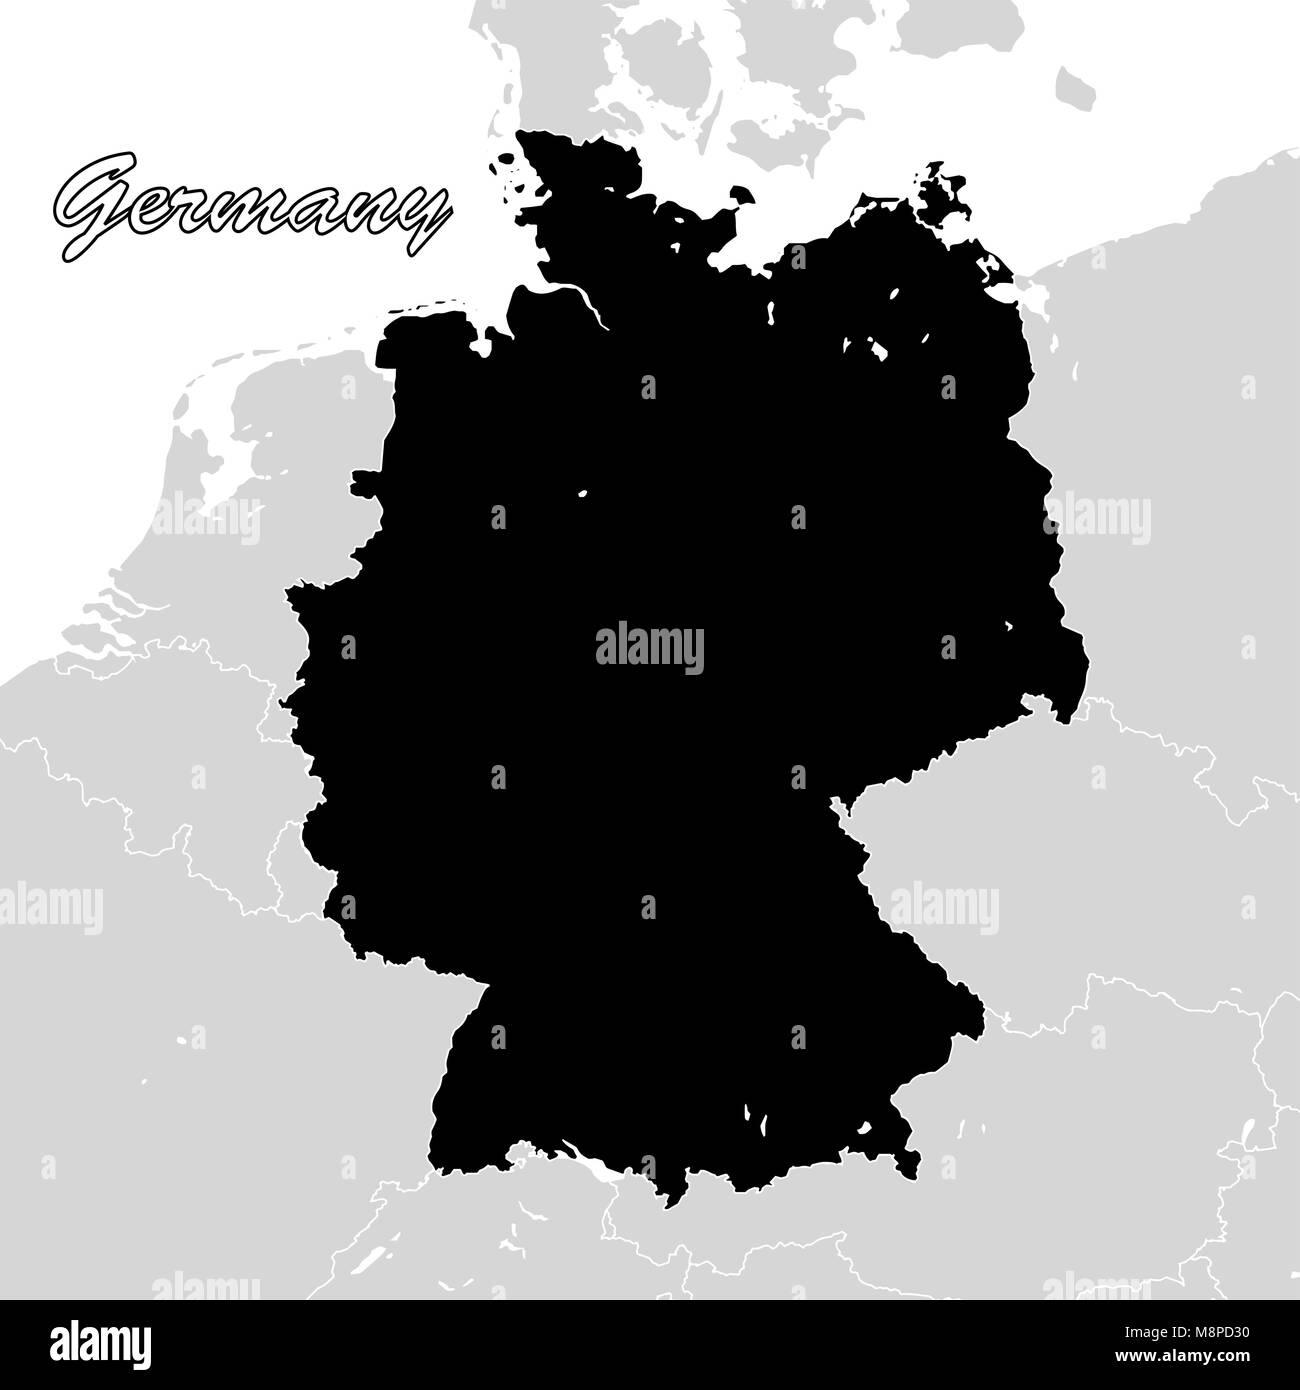 Germany Political Sihouette Map. Black and White Vector Graphic Stock Vector